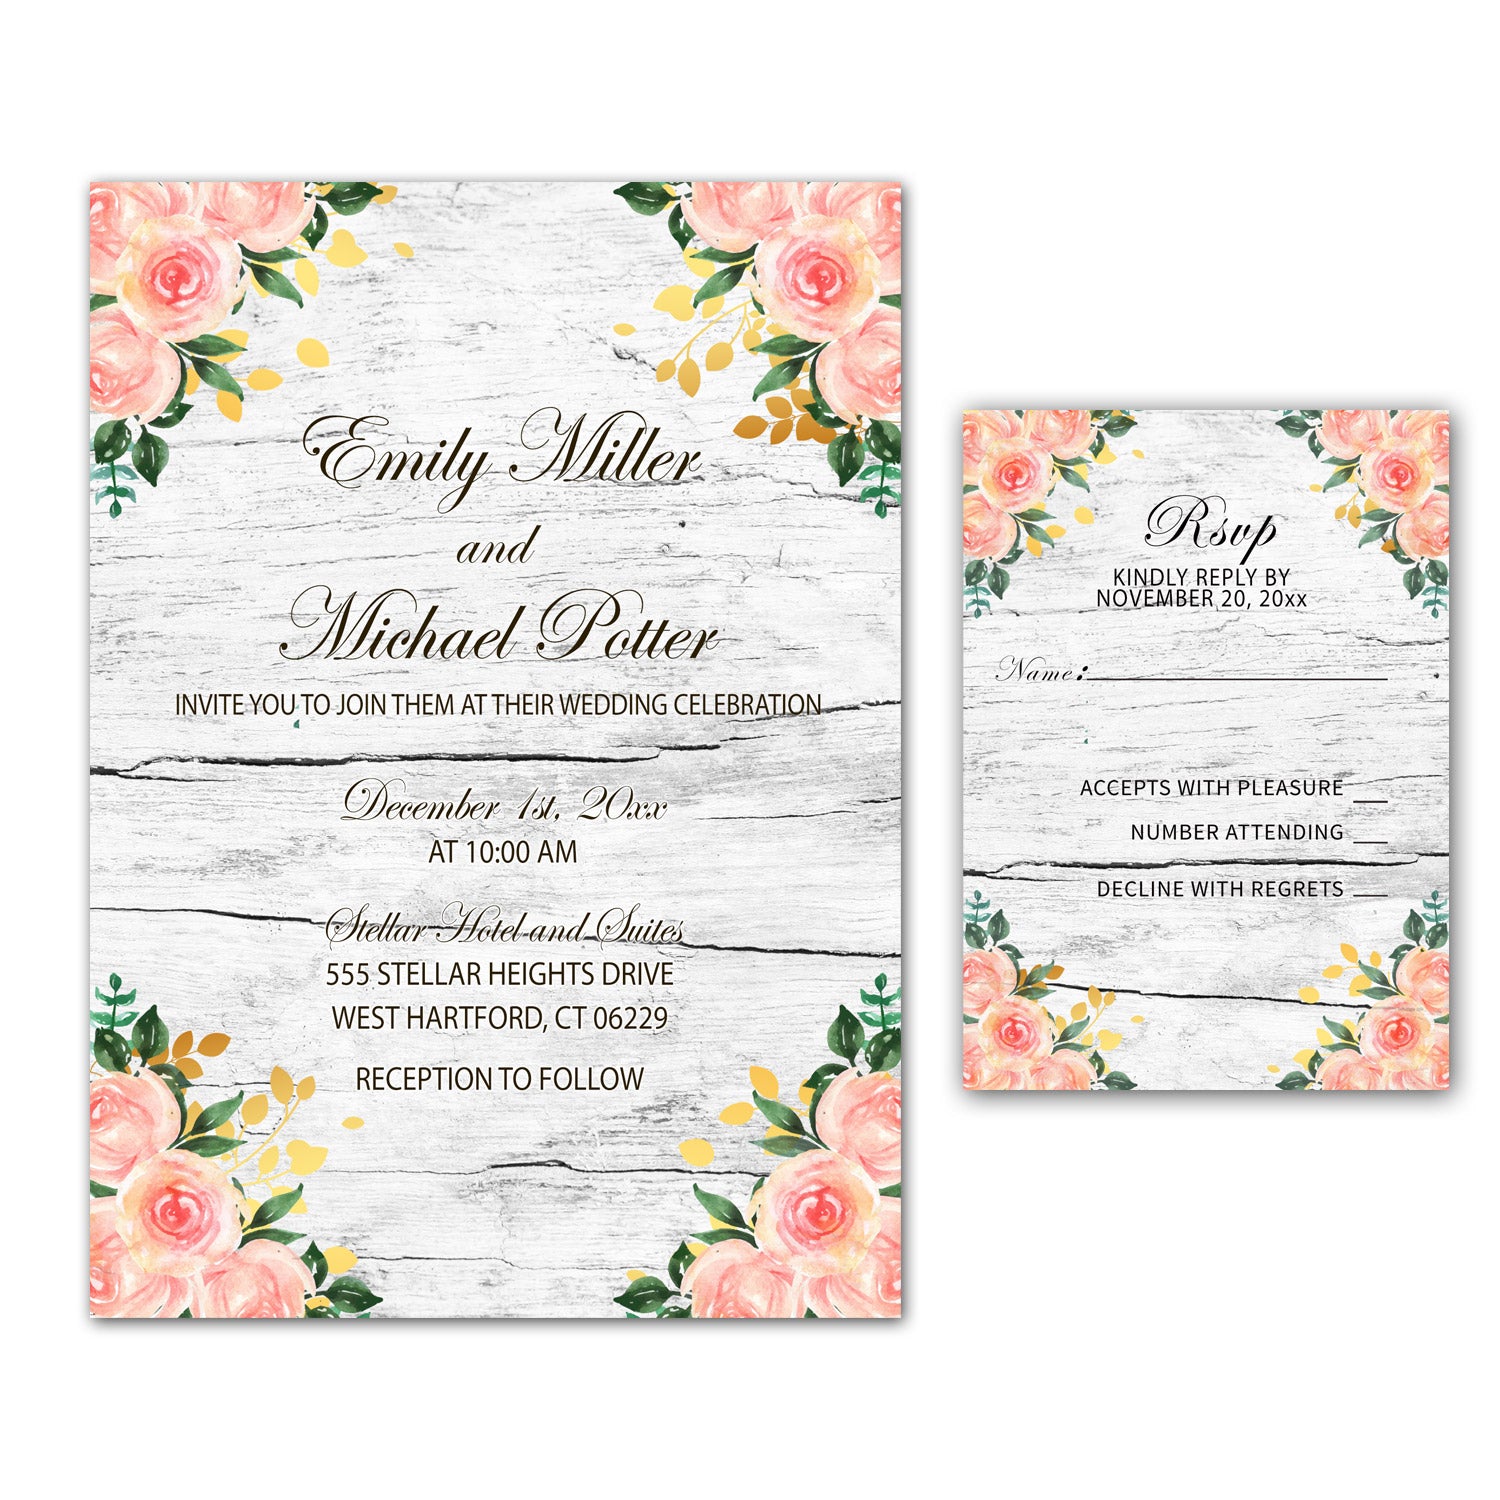 100 Gold Pink Rustic Wood Floral Wedding Invitations & RSVP Cards